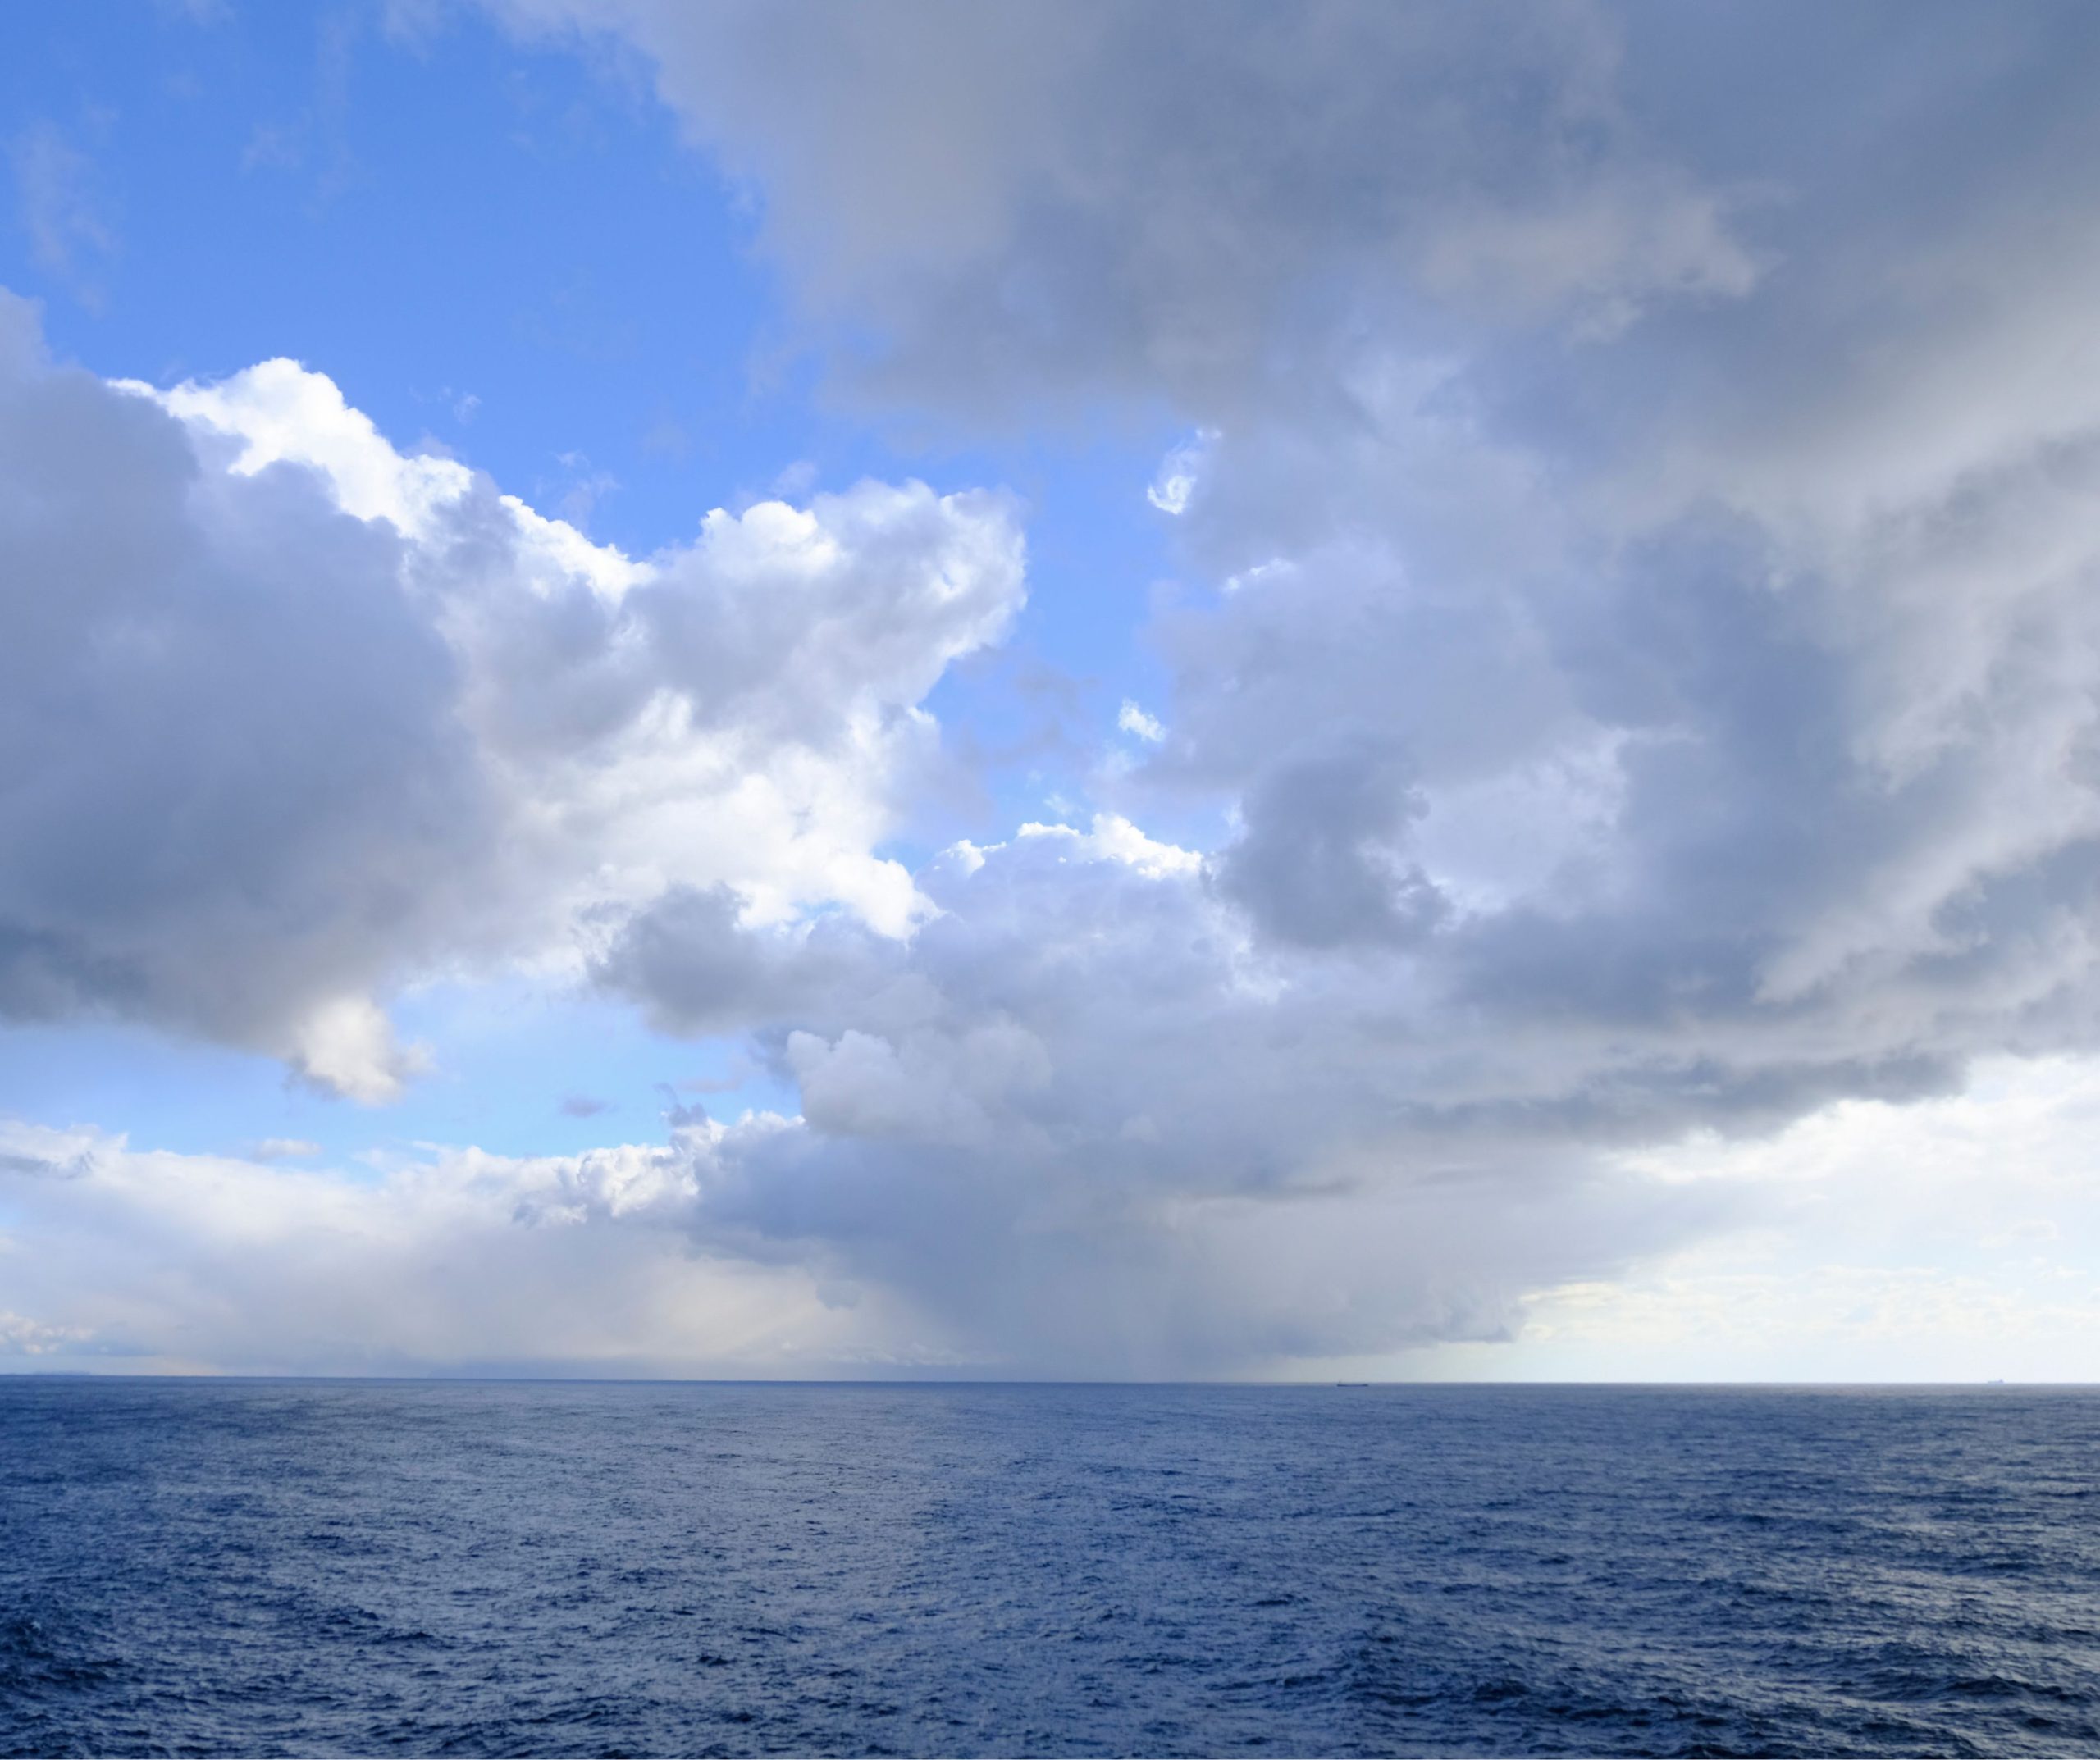 Greenhouse gases are changing air flow over the Pacific Ocean – raising Australia’s risks of extreme weather